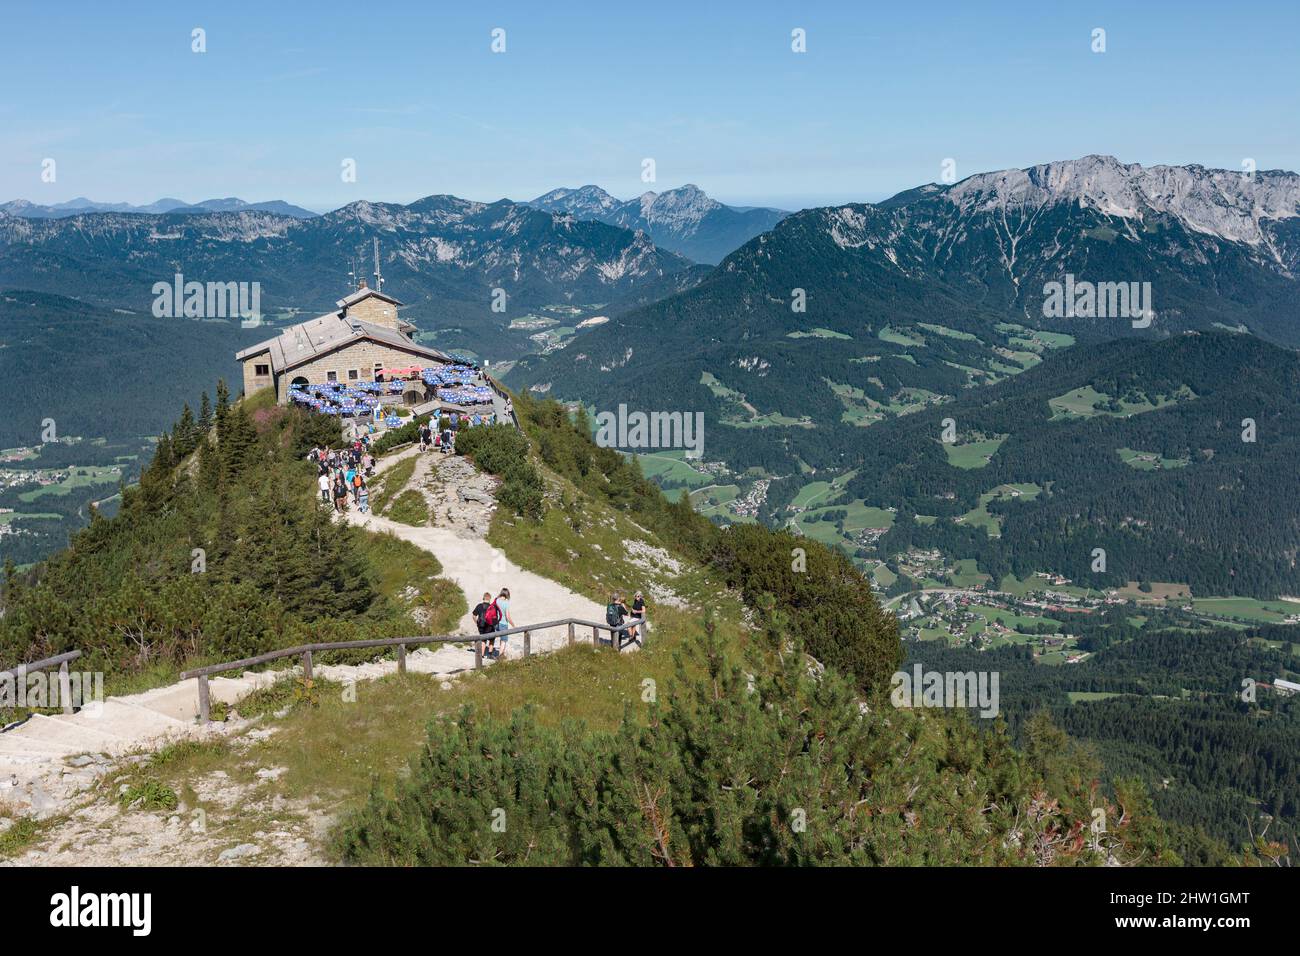 Germany, Bavaria, Upper Bavaria, Berchtesgaden, Obersalzberg, Kehlsteinhaus, the Eagle's Nest, built by the Nazis on a rocky peak at 1800 meters to serve as a conference center, now a tourist restaurant Stock Photo